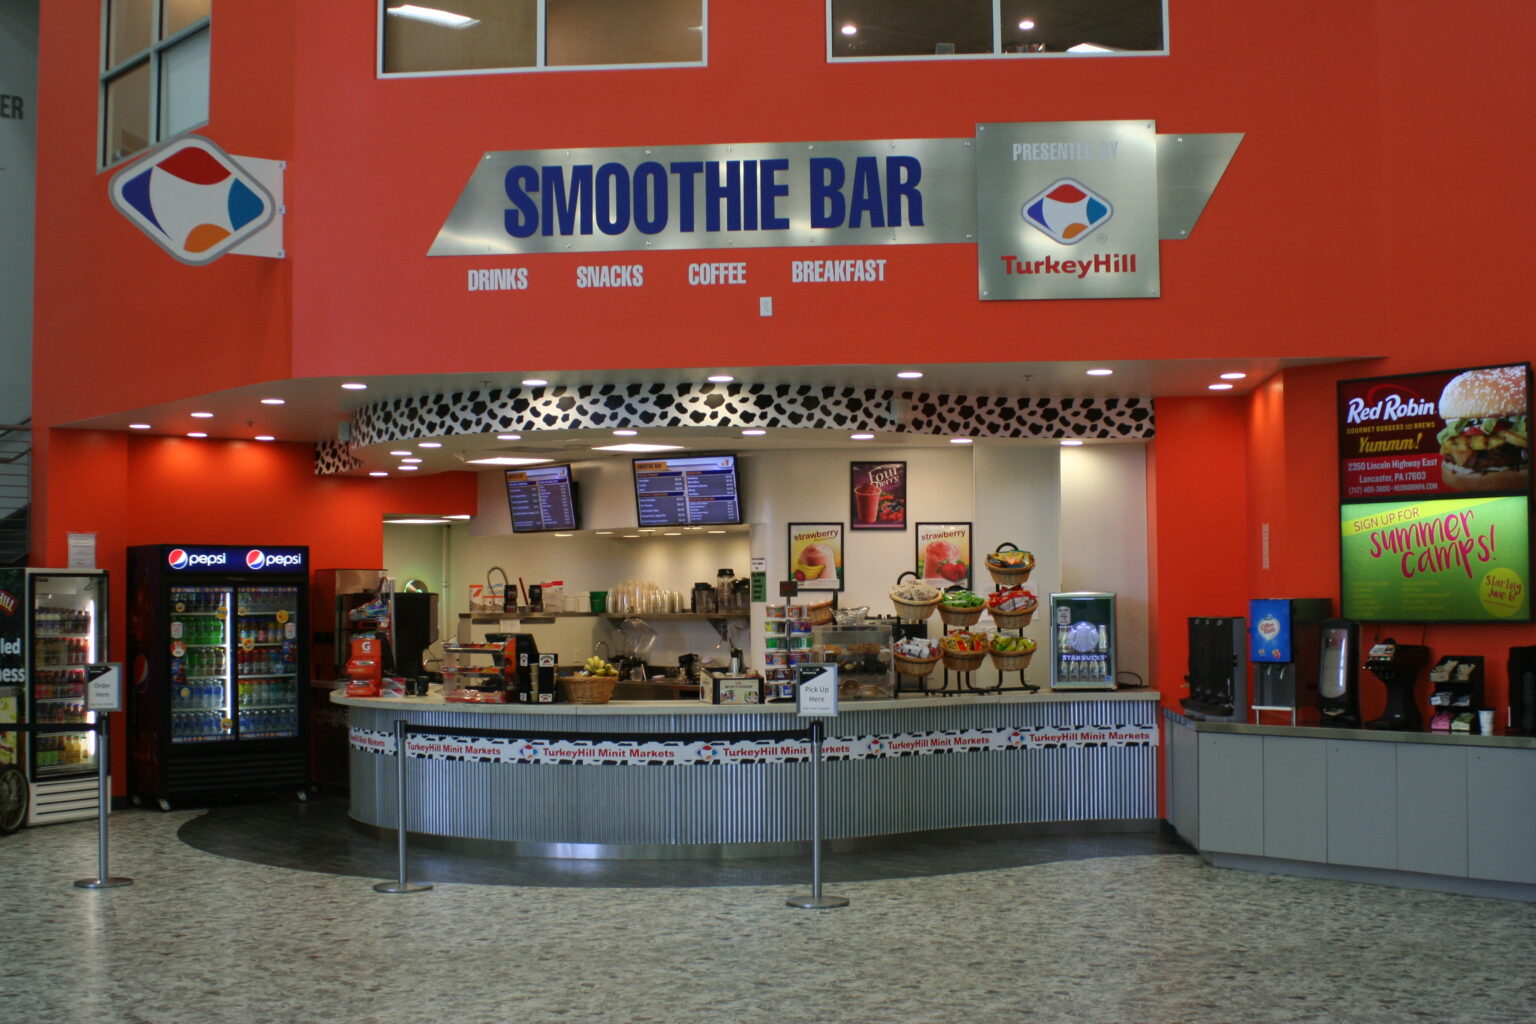 A bright wall graphic that says “smoothie bar” in blue letters on a silver metal background.